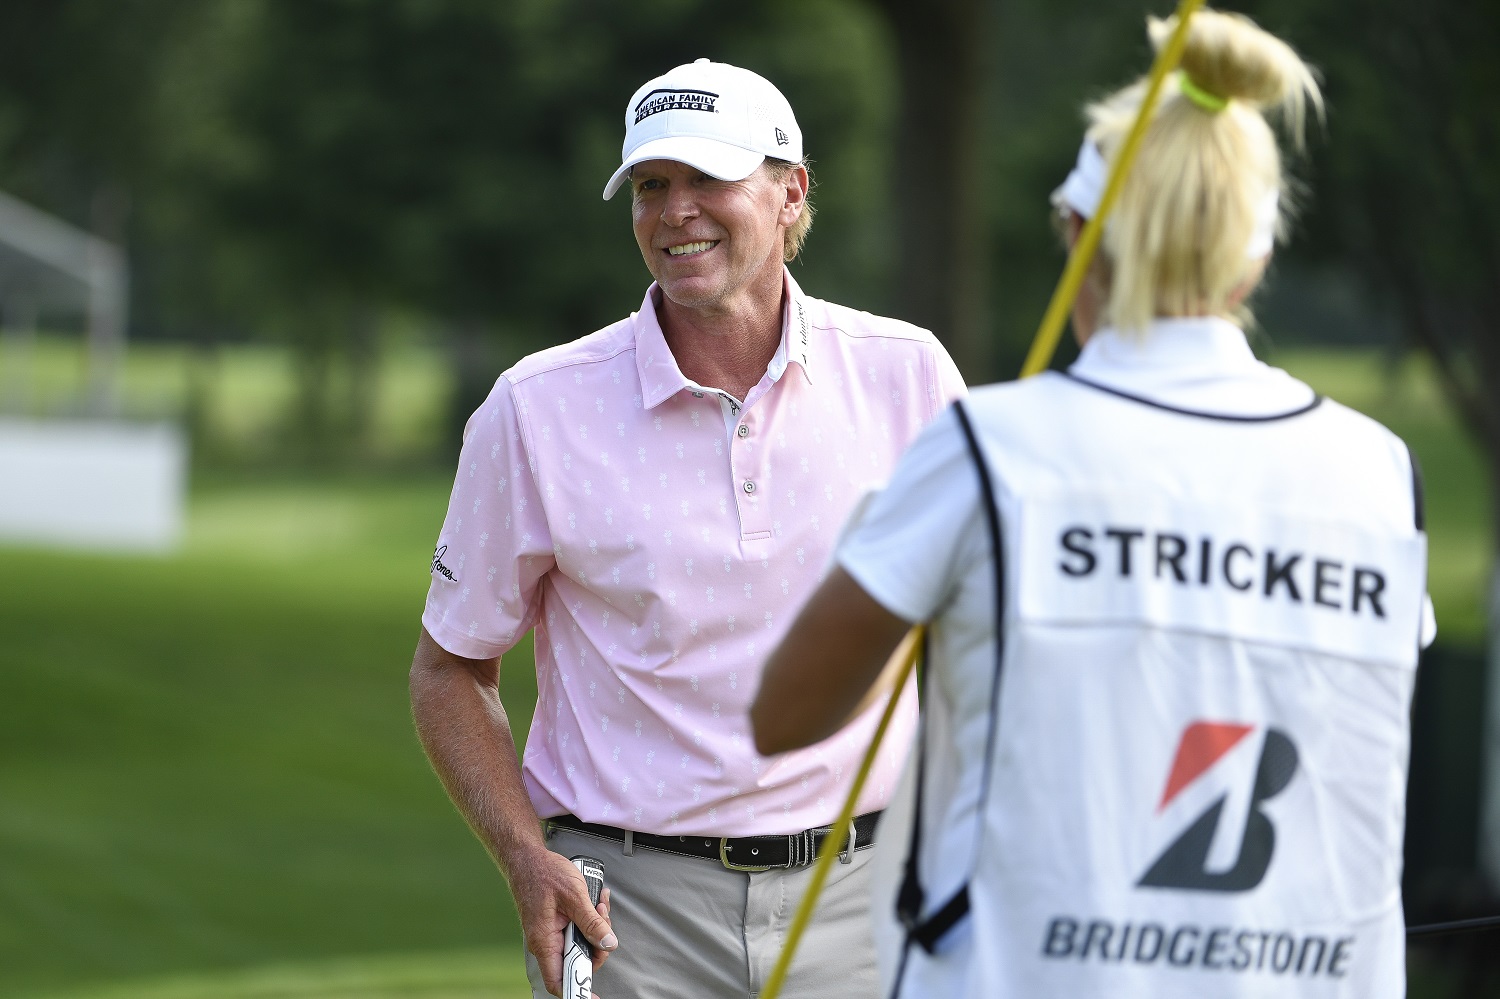 Steve Stricker smiles during the final round of the PGA Tour Champions Bridgestone Senior Players Championship at Firestone Country Club on June 27, 2021, in Akron, Ohio. | Tracy Wilcox/PGA Tour via Getty Images